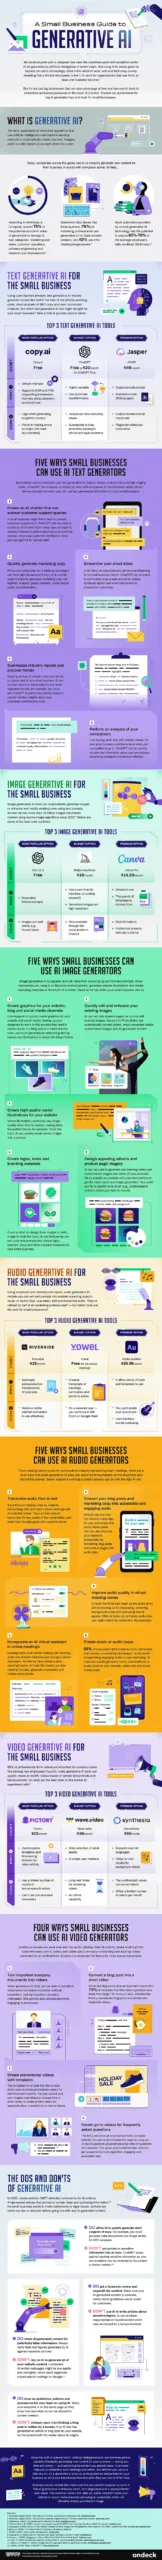 AI for SMBs infographic